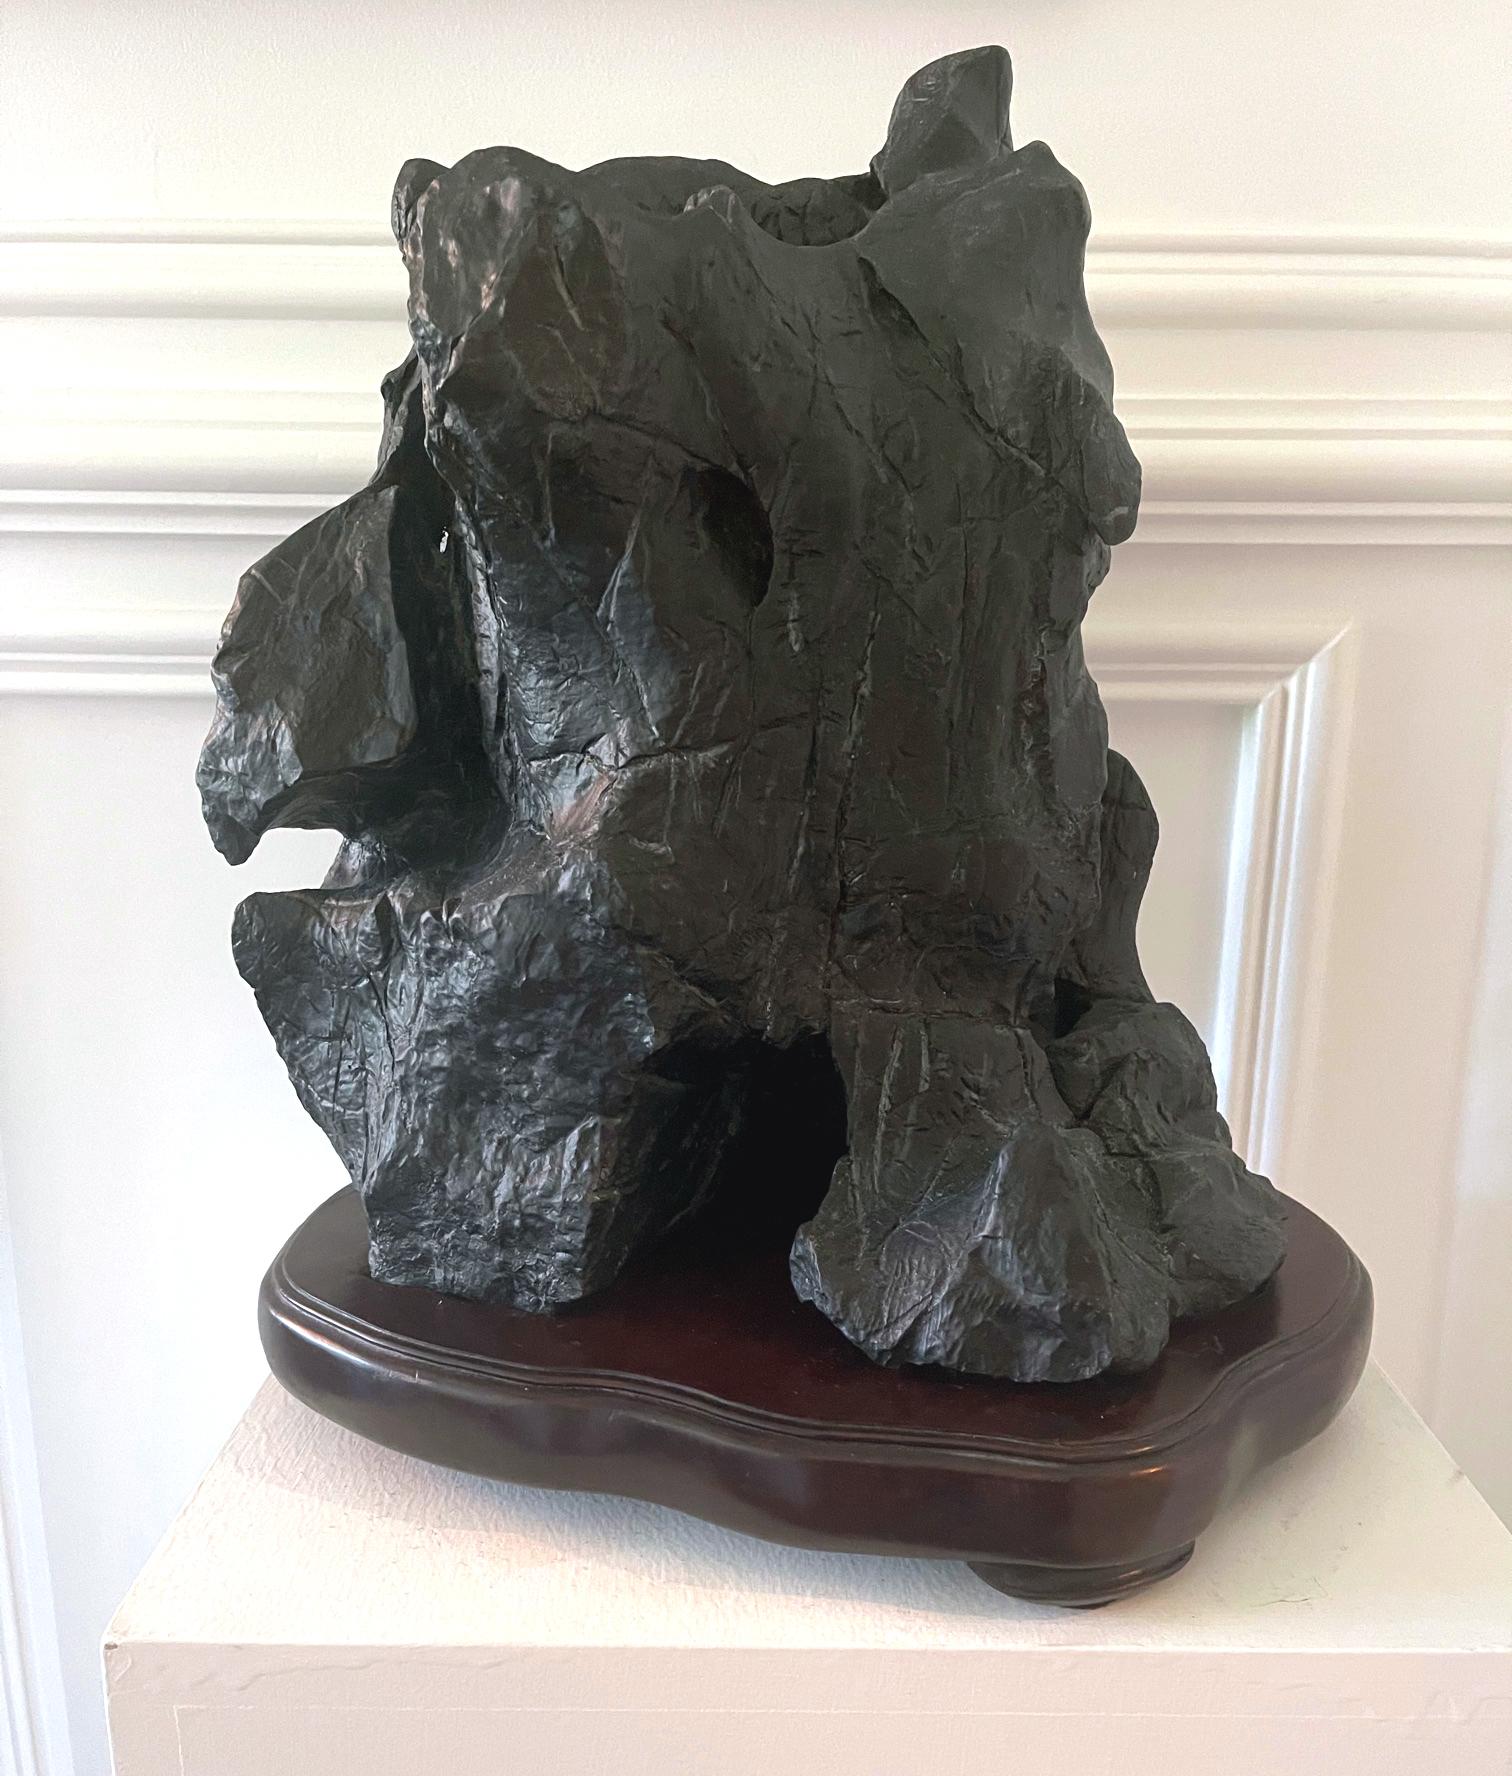 An impressive Chinese scholar stones (also known as Gong Shi, meditation stone and spirit rock) on display wood stand circa late 19th century to early 20th century. This mountain-form Lingbi stone features a nearly complete black surface with very